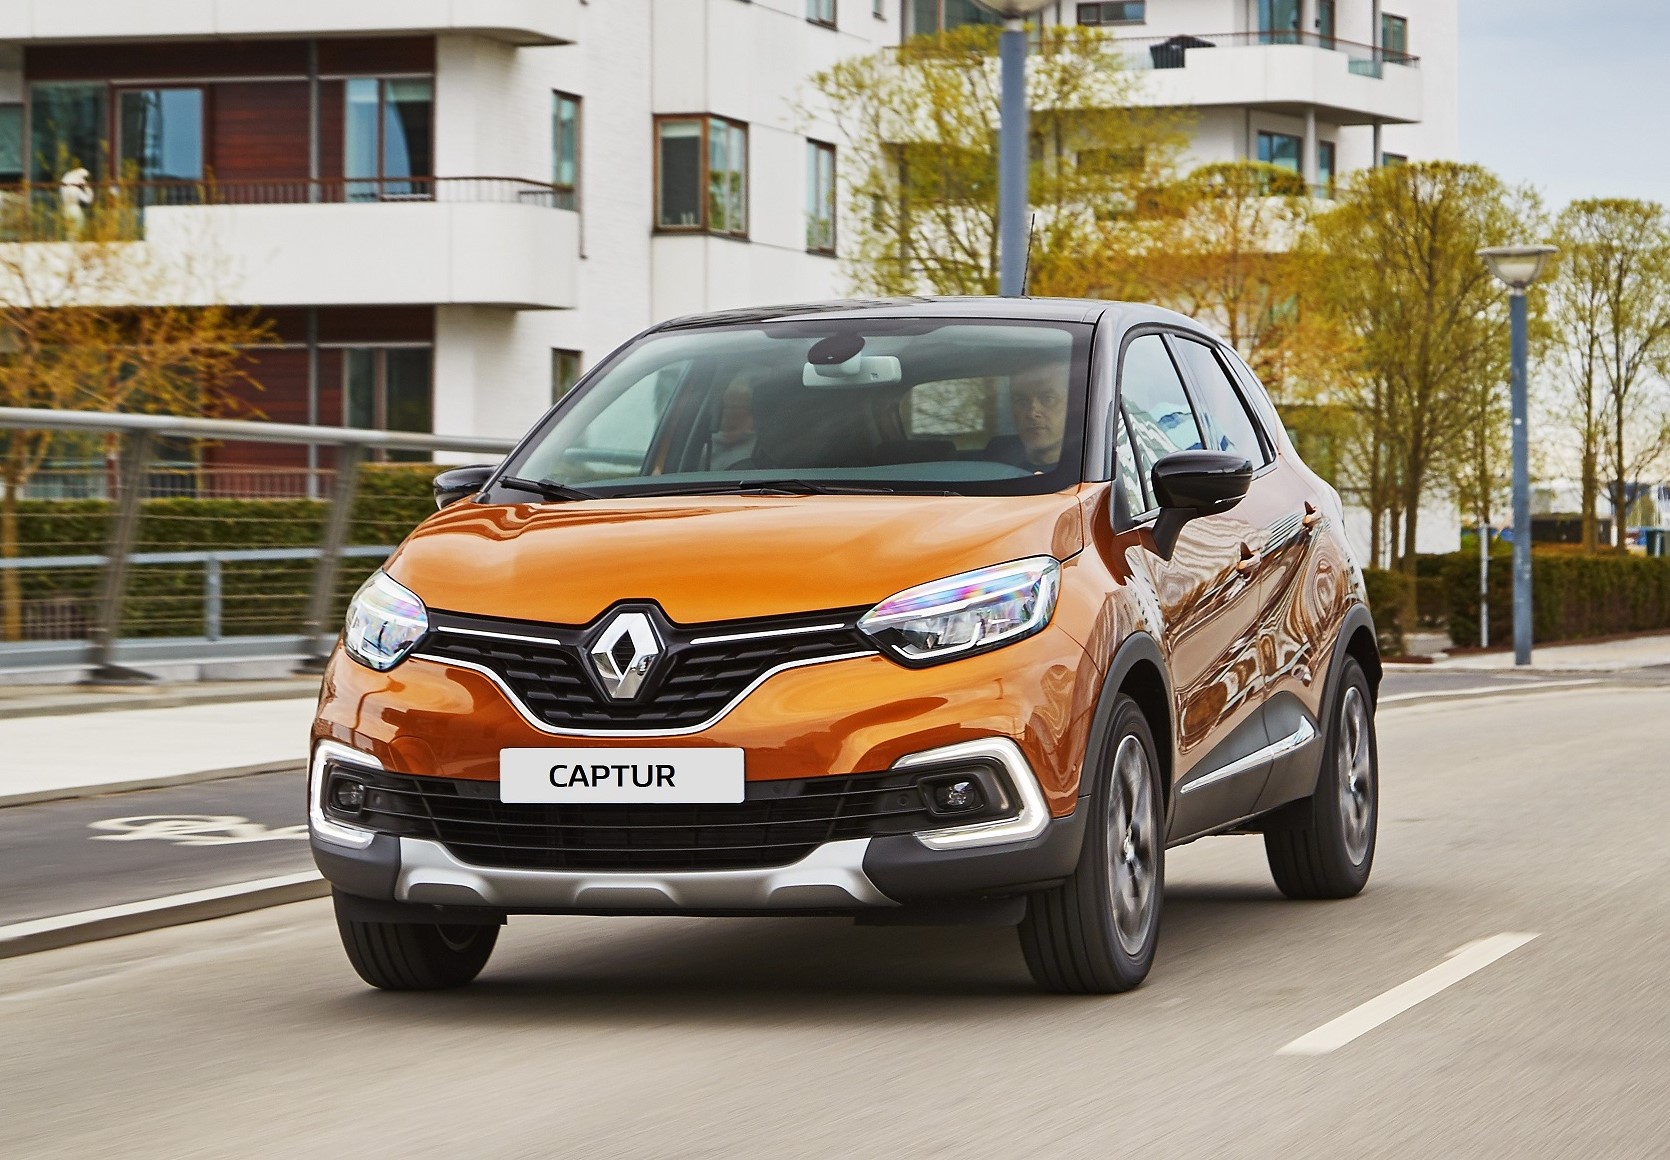 Test Drive The Renault Captur For A Year With No Obligation